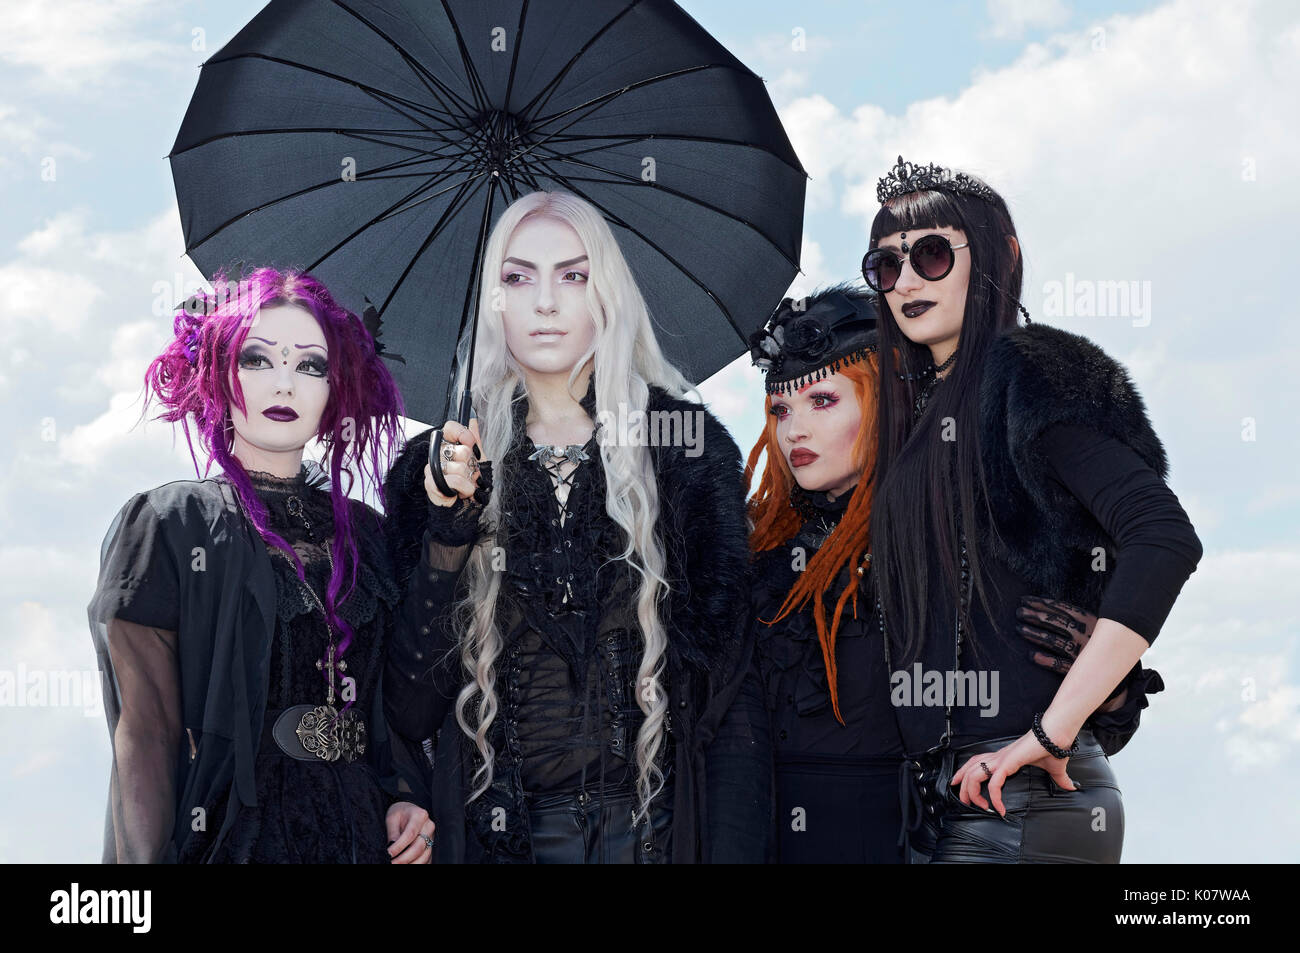 Cosplay, four young woman dressed in gothic clothing, Japan Day 2017, Düsseldorf, North Rhine-Westphalia, Germany Stock Photo